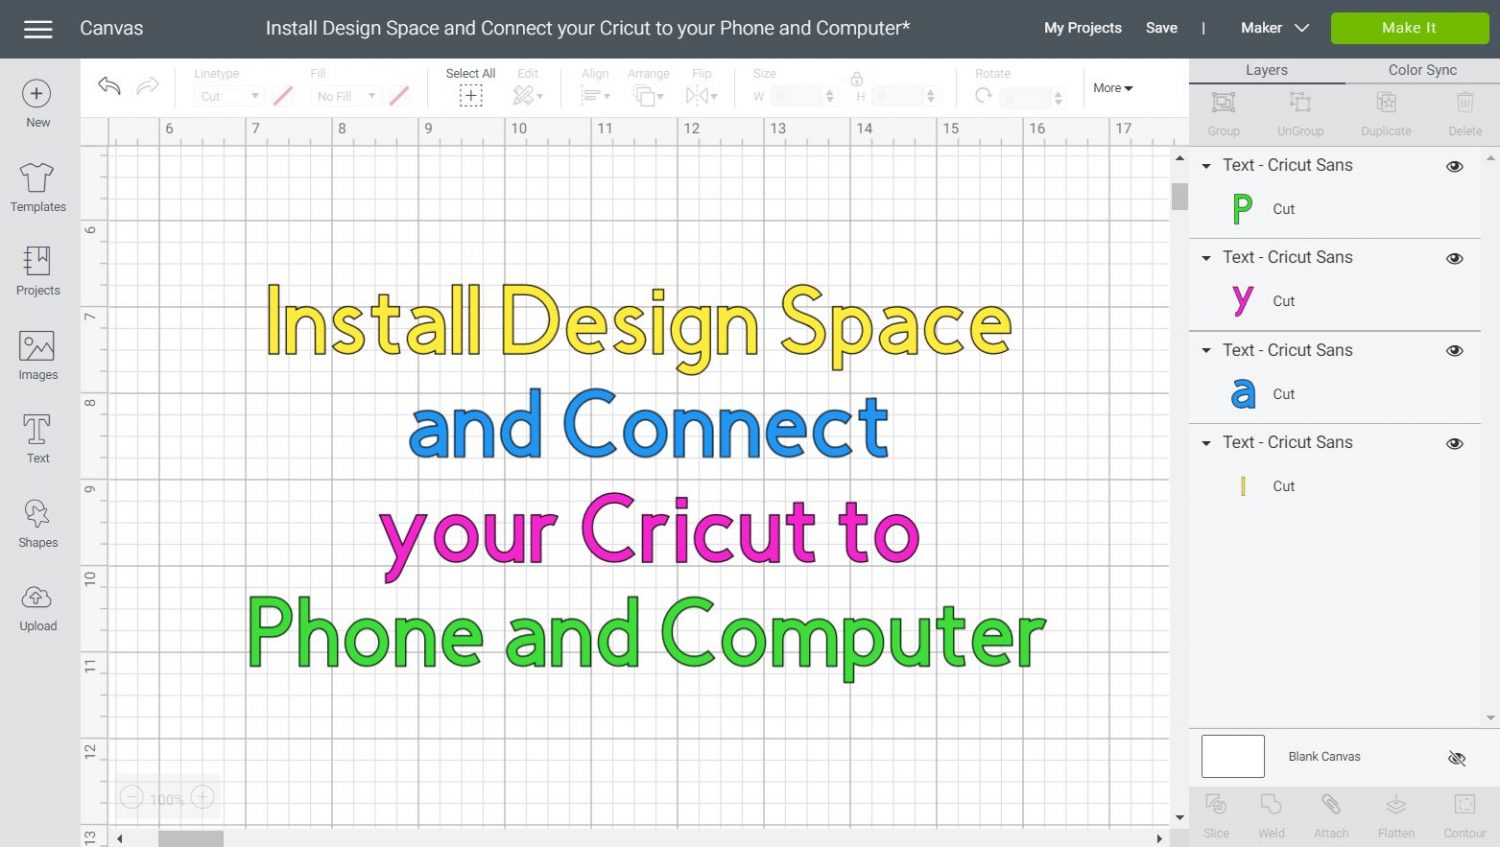 Cricut Design Space Updates & Changes (& How They Apply to My